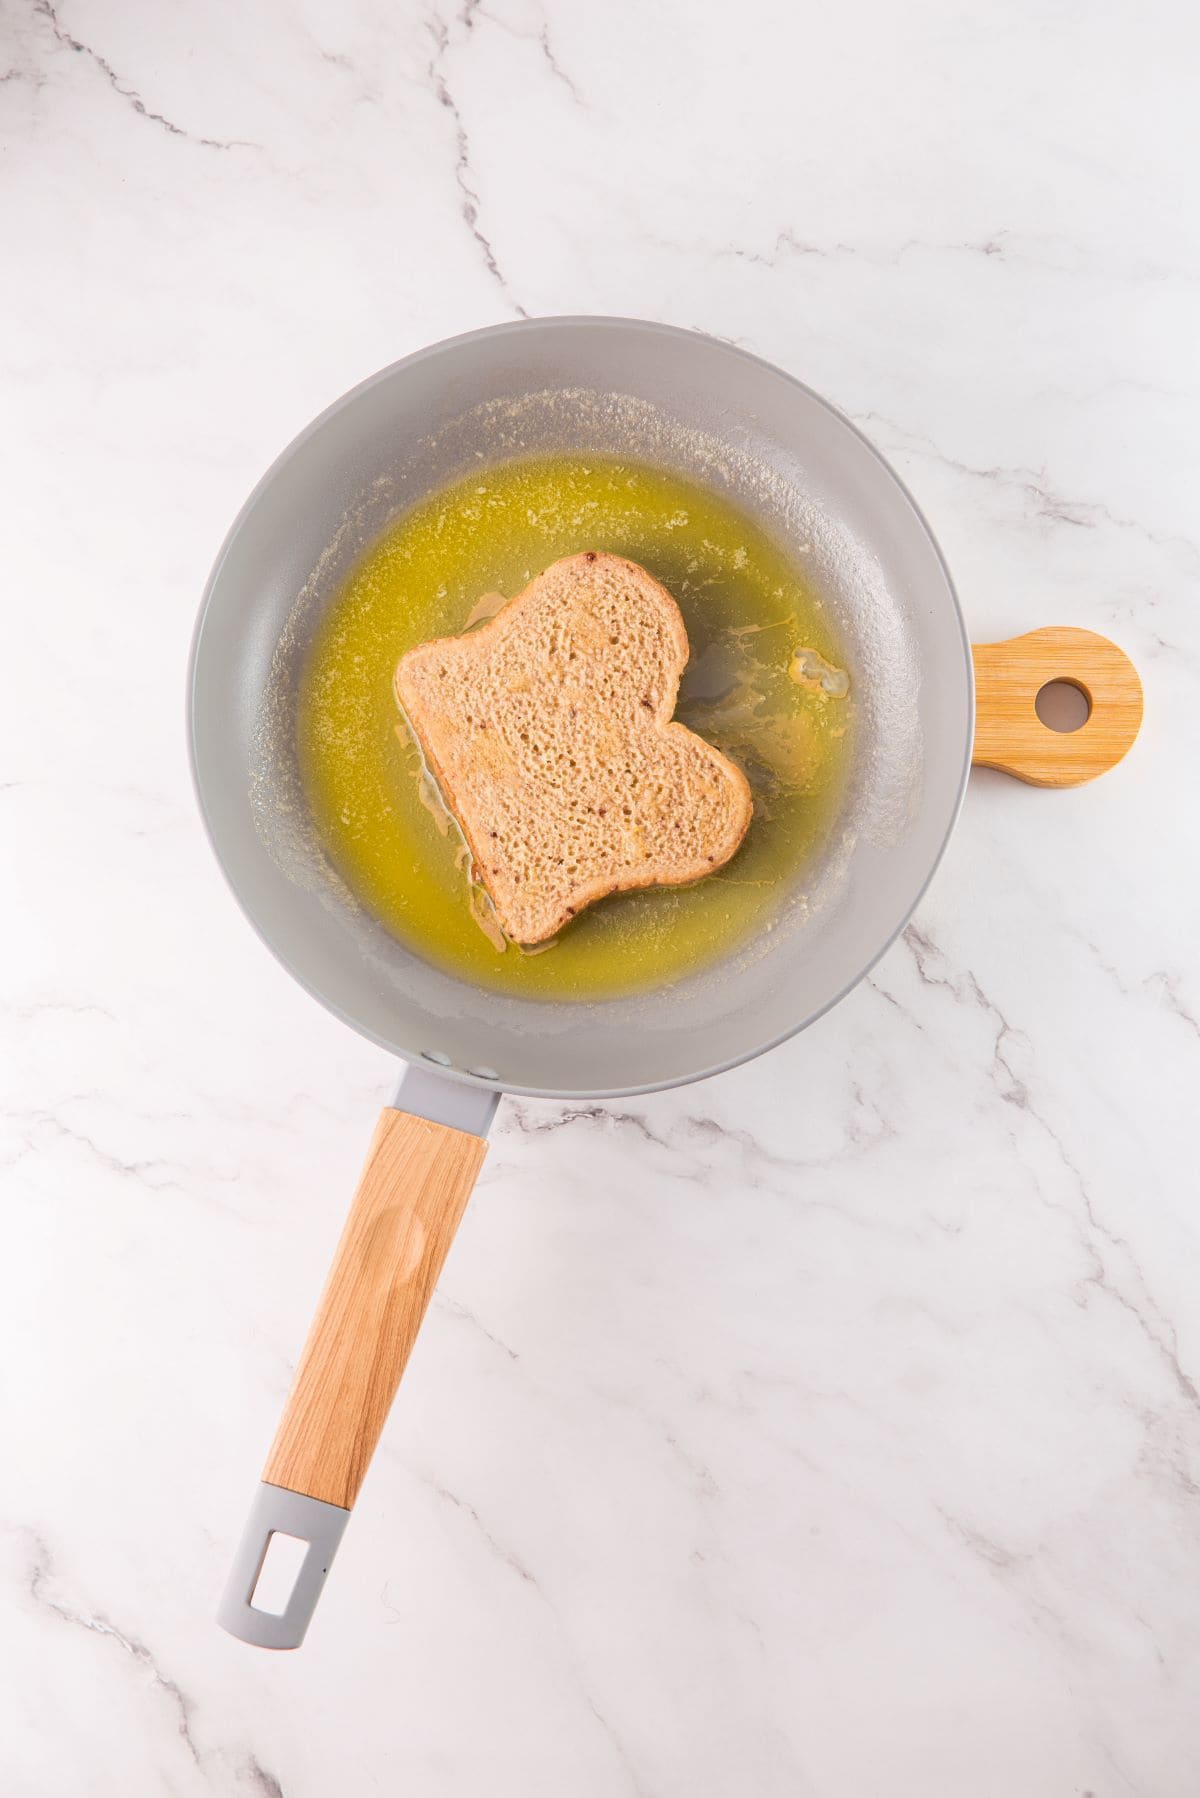 Melted butter in a skillet with a slice of bread.